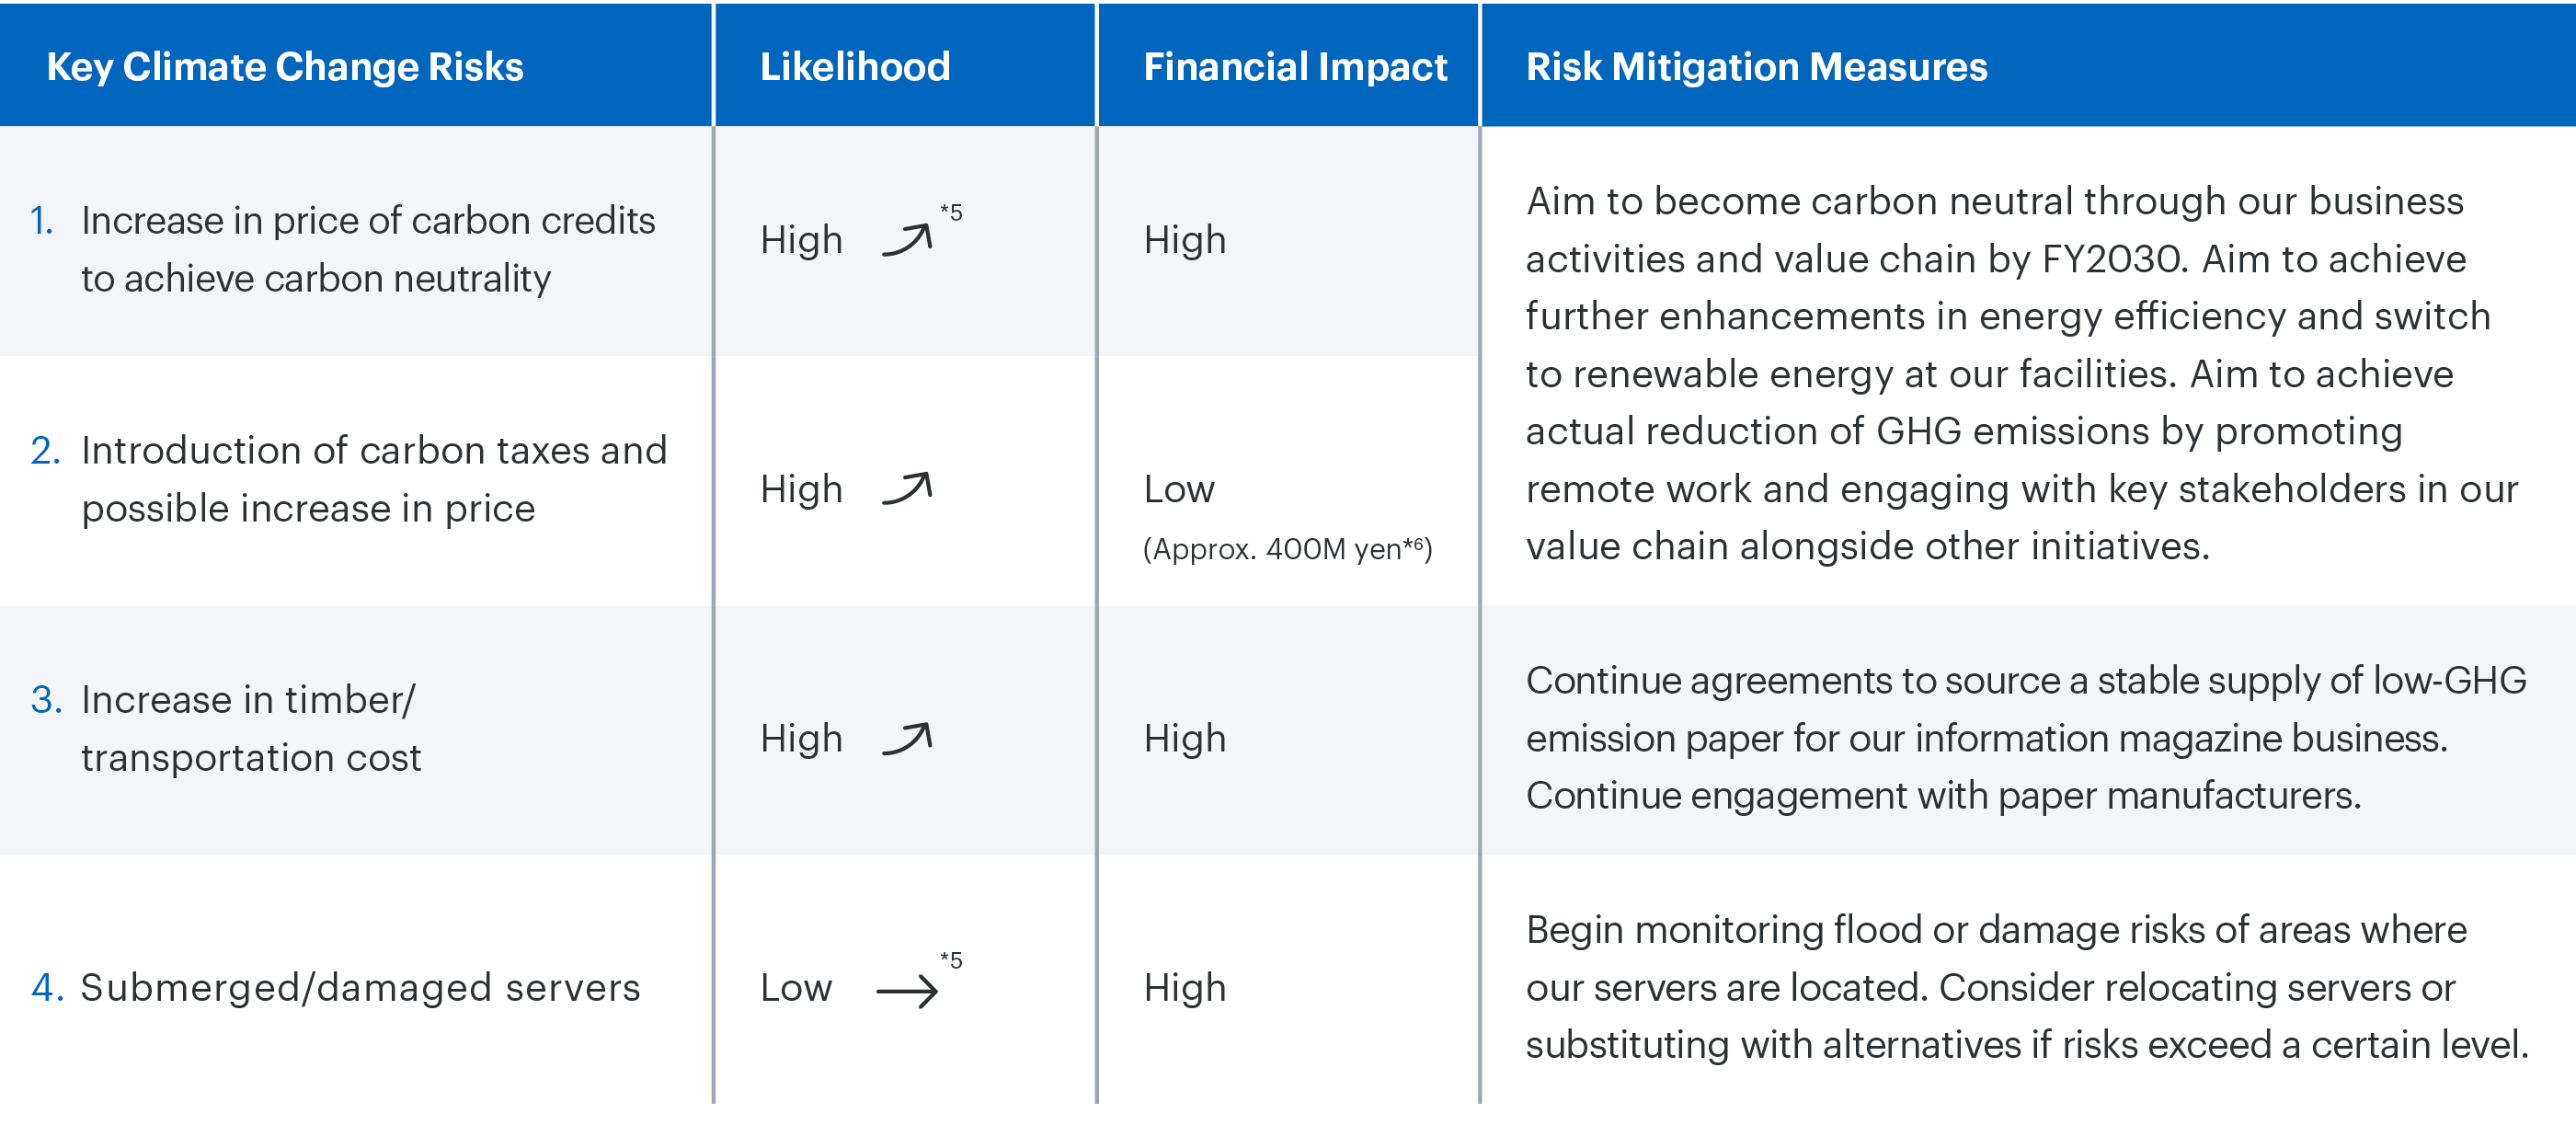 The four key climate change risks and their respective mitigation measures. For example, we aim to achieve the actual reduction of GHG emissions to address increases in the price of carbon credits and carbon taxes.